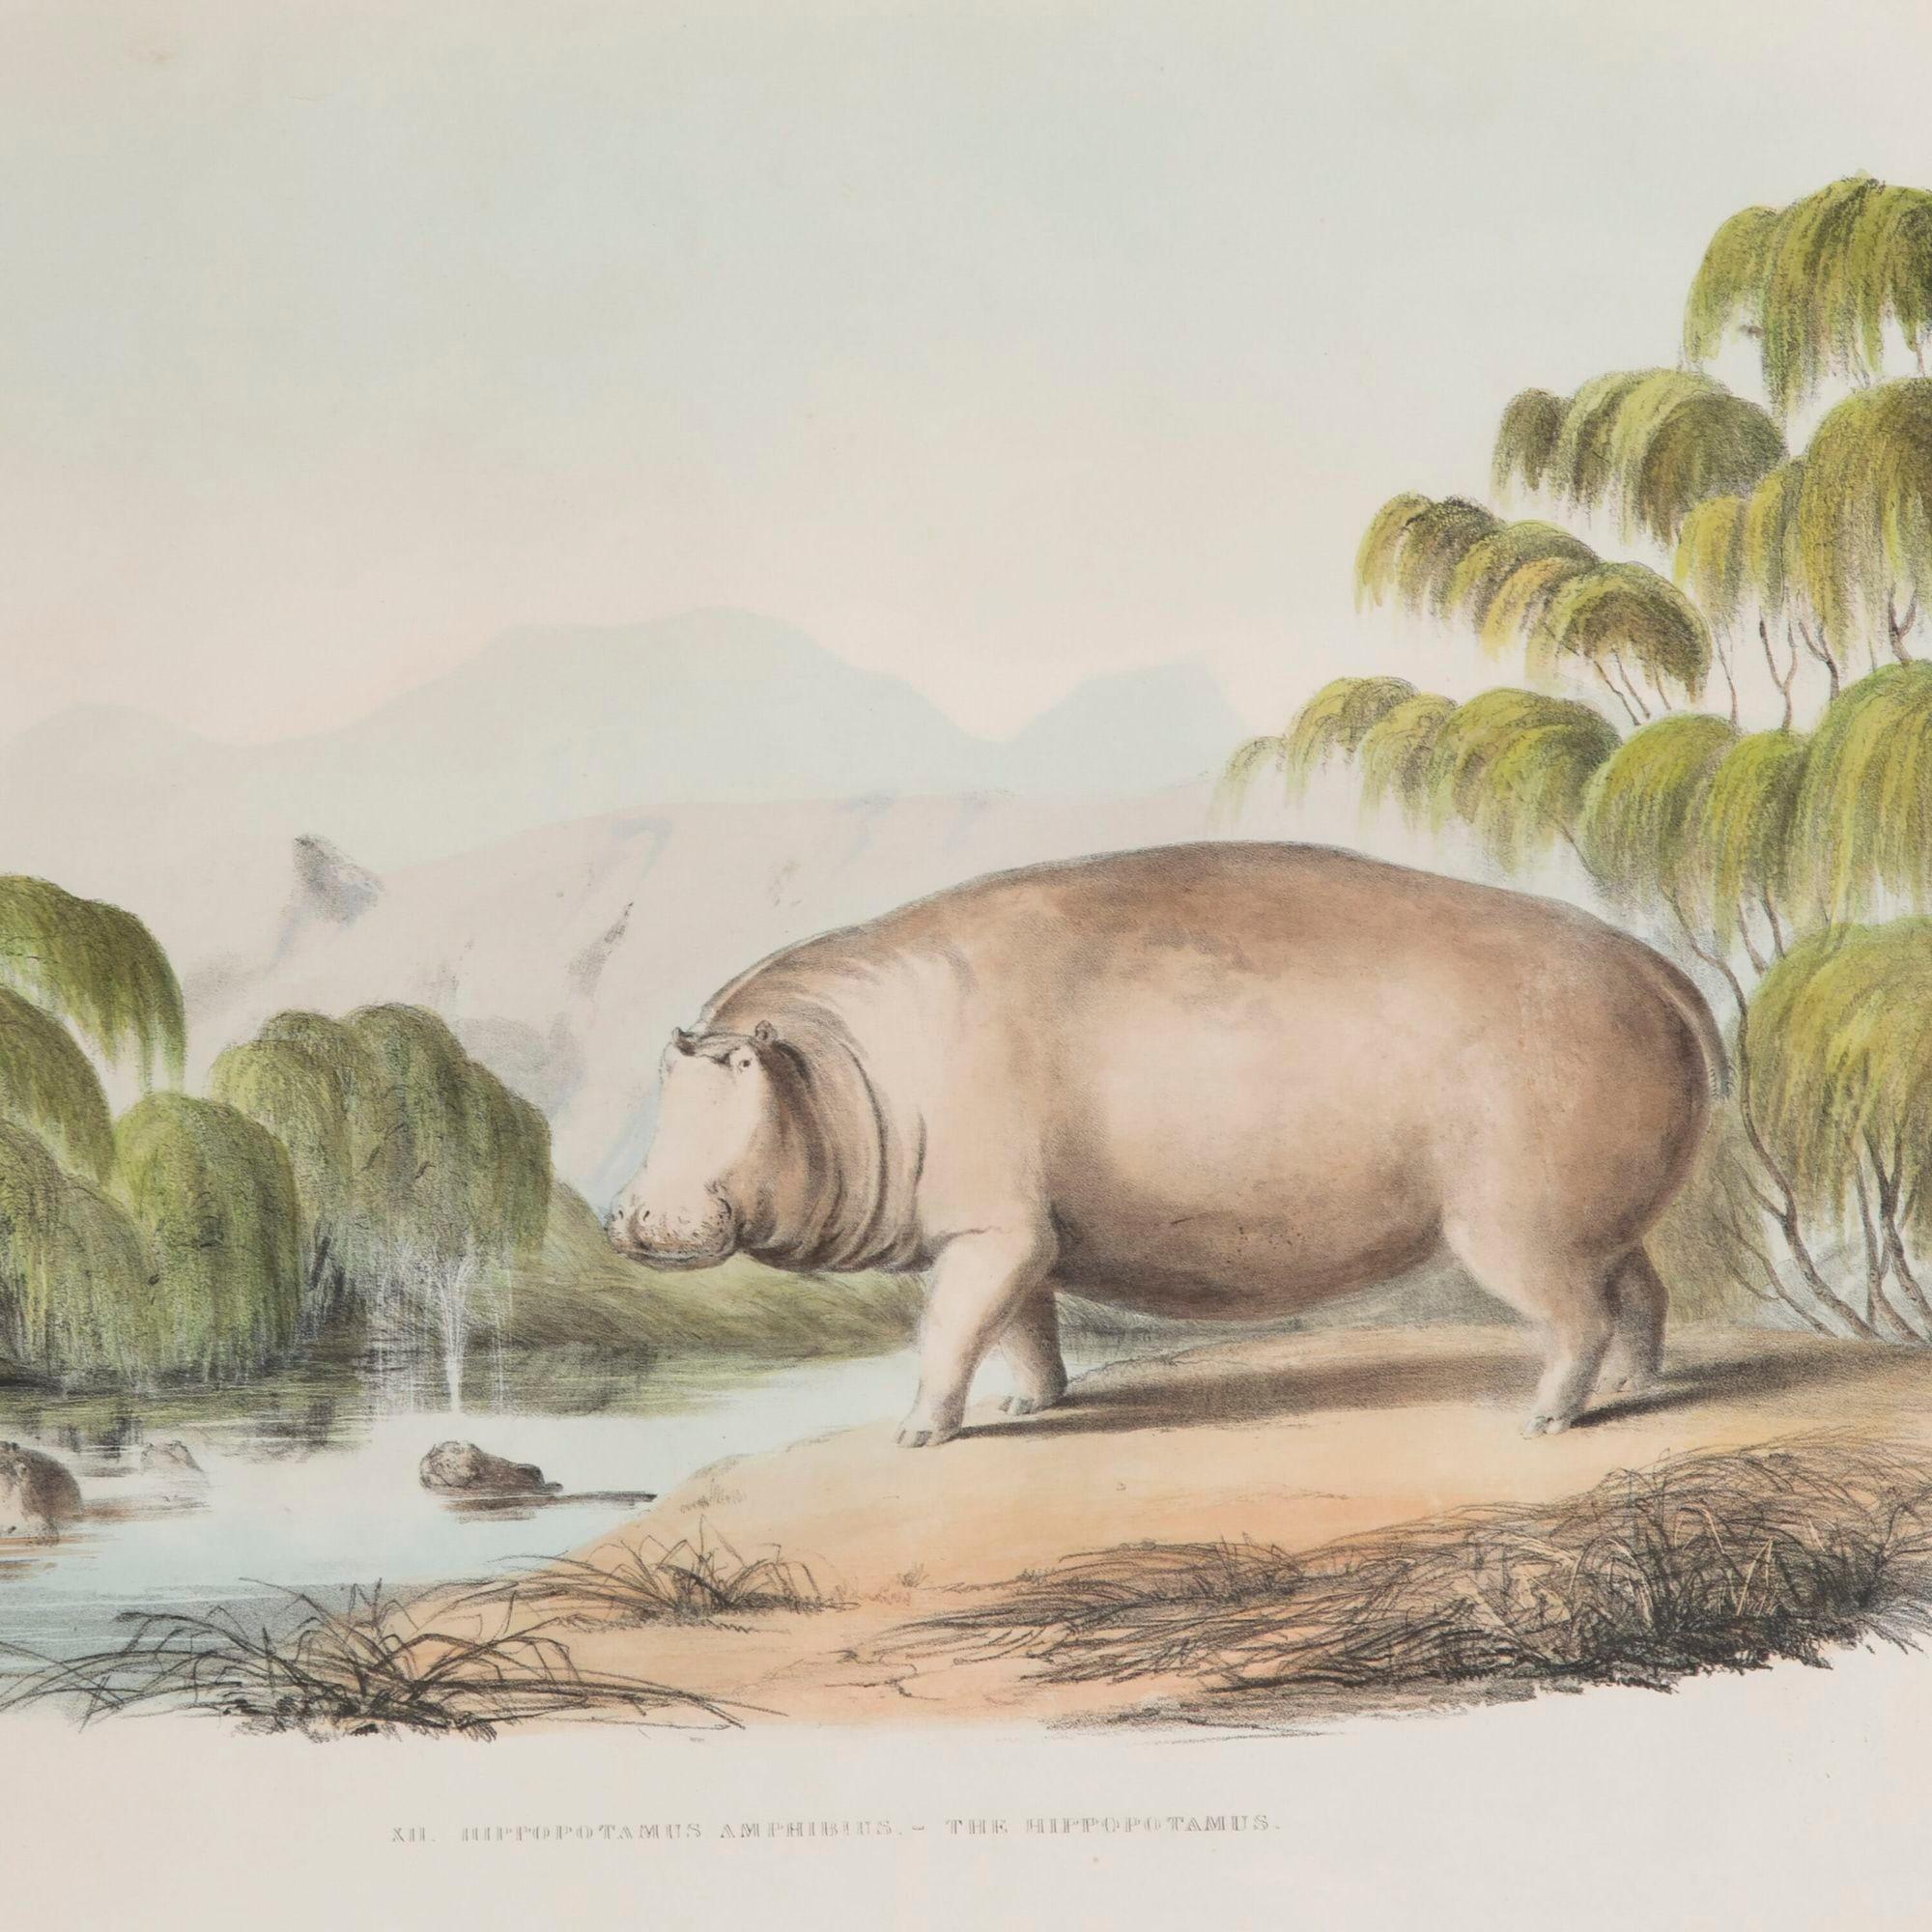 Series of four 19th century fine hand-coloured lithographed plates of African wildlife.
These lithographs depict an African Rhinoceros, The Hippopotamus, The Water Buck and The Hartebeest from Portraits of the game and wild animals of Southern